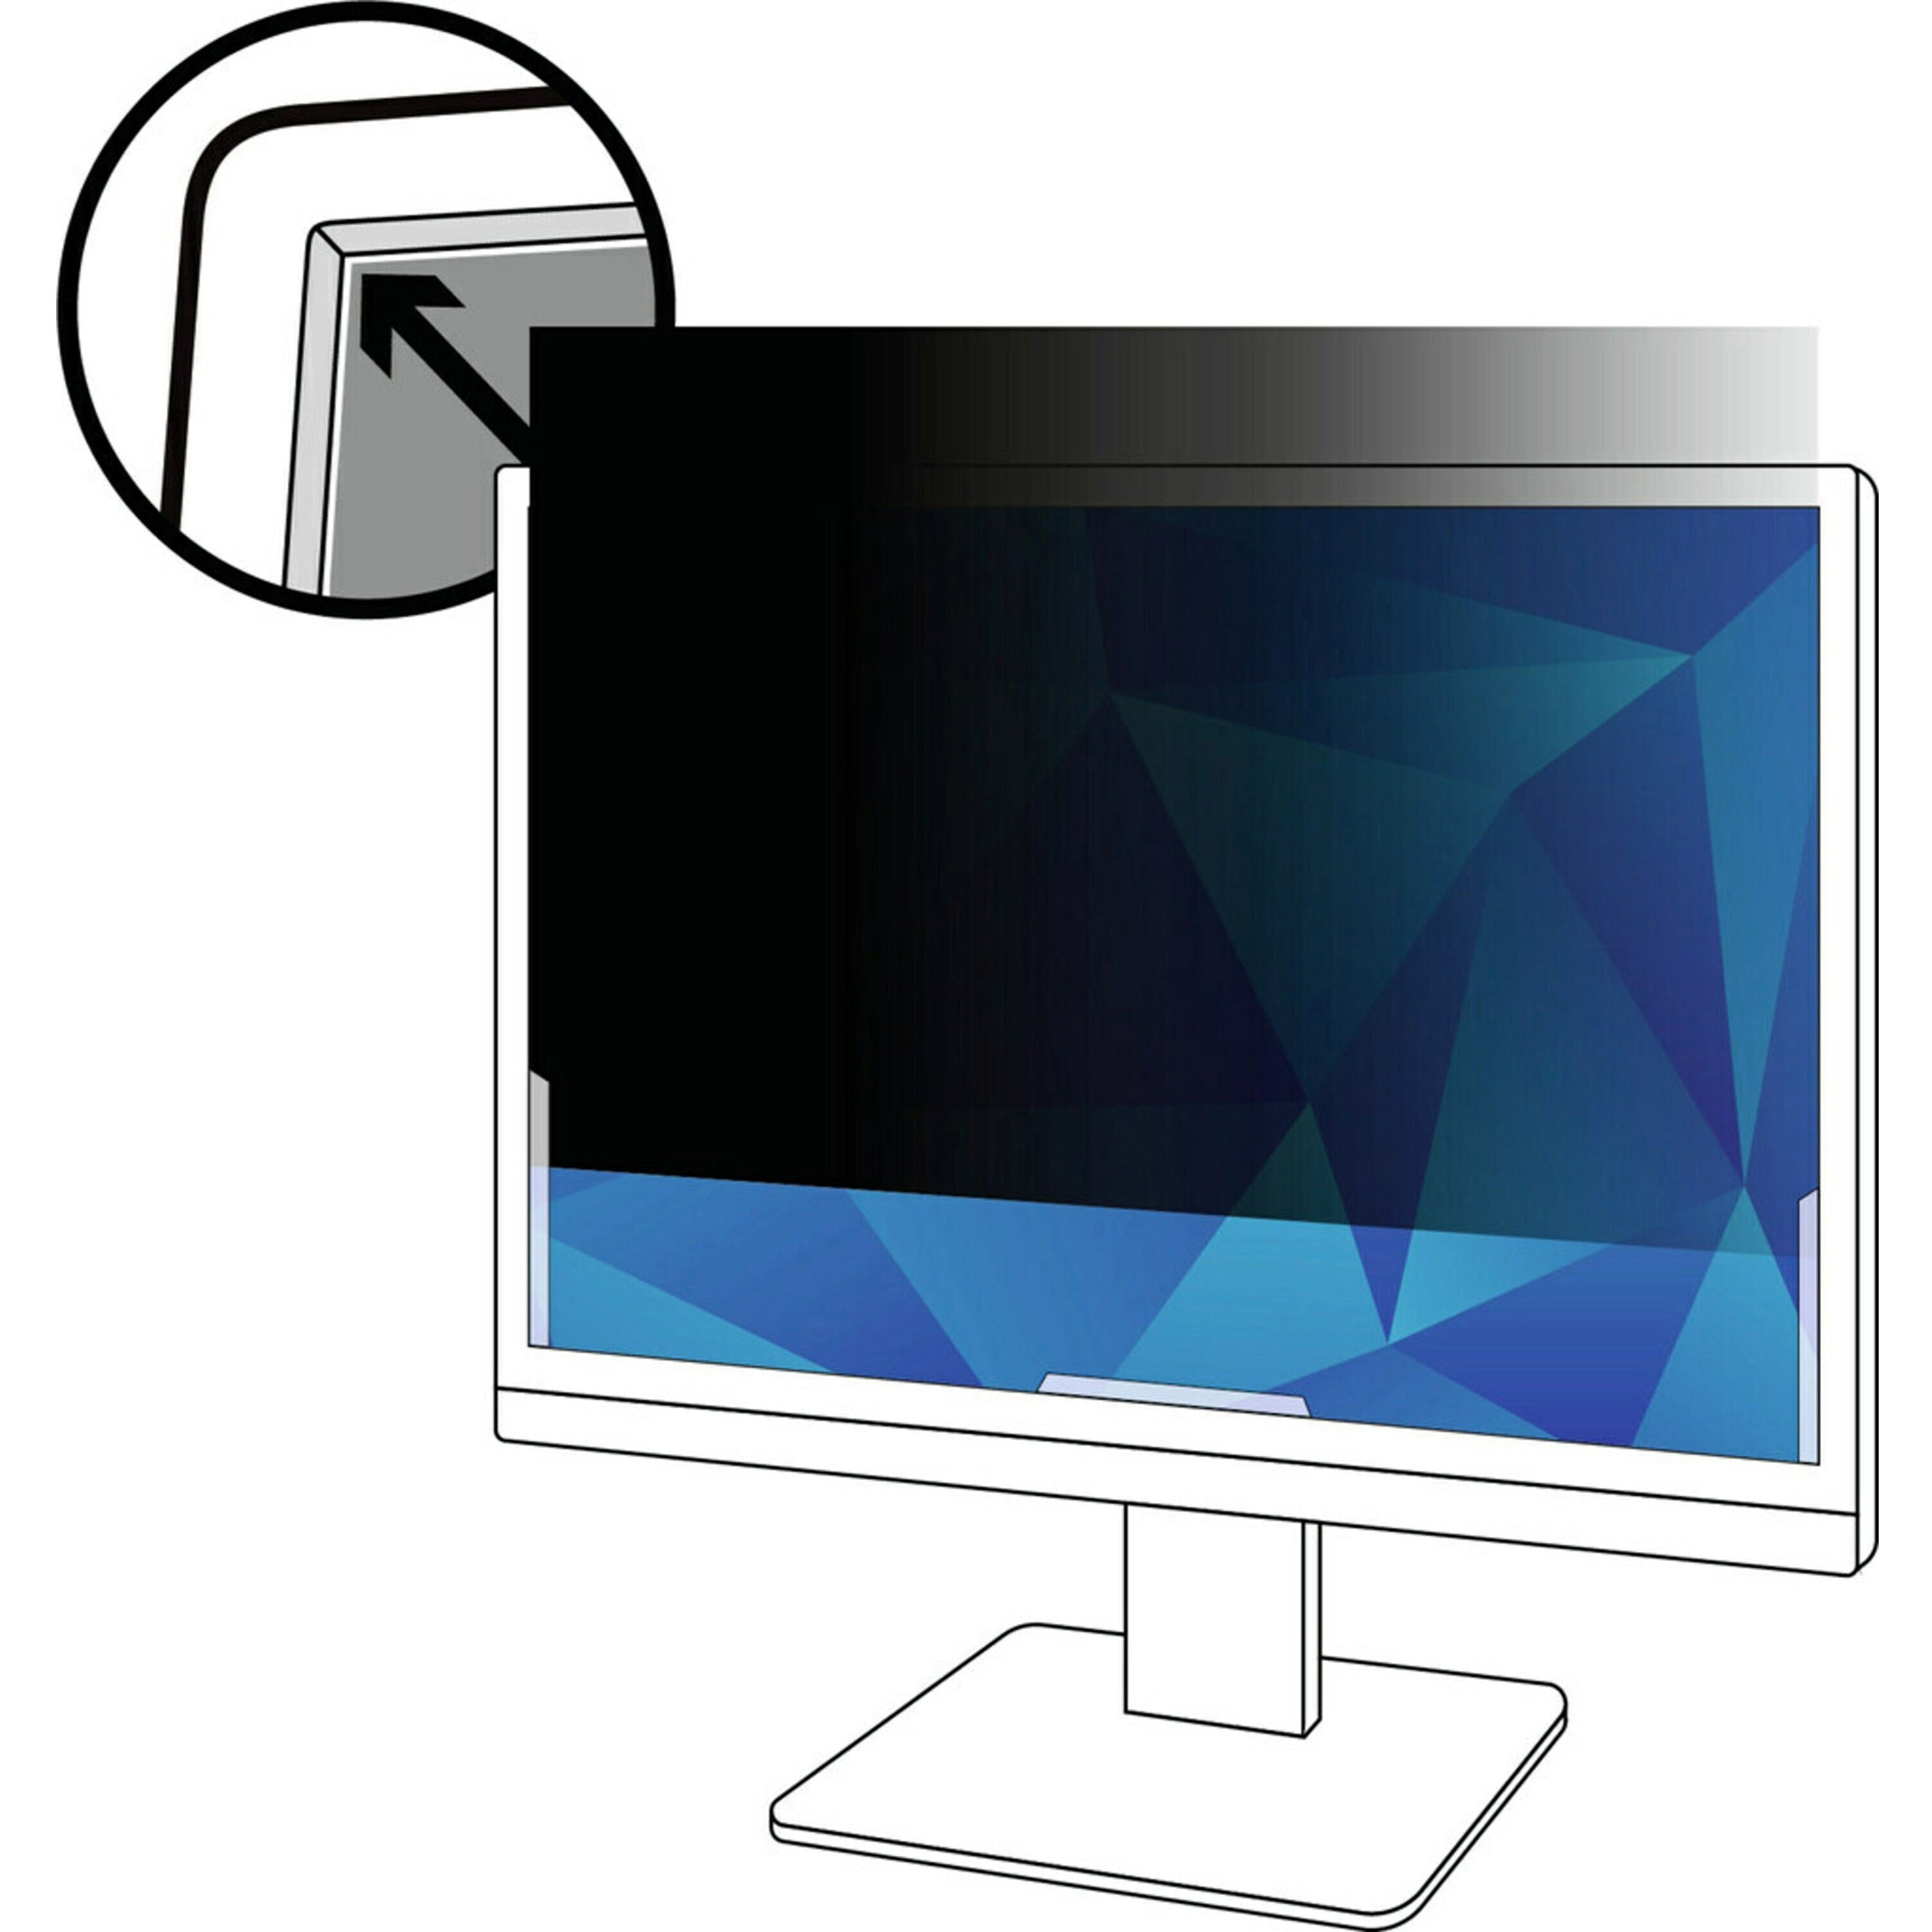 3m-privacy-filter-black-matte-for-201-widescreen-lcd-monitor-1610-scratch-resistant-fingerprint-resistant-dust-resistant-anti-glare_mmmpf201w1b - 1